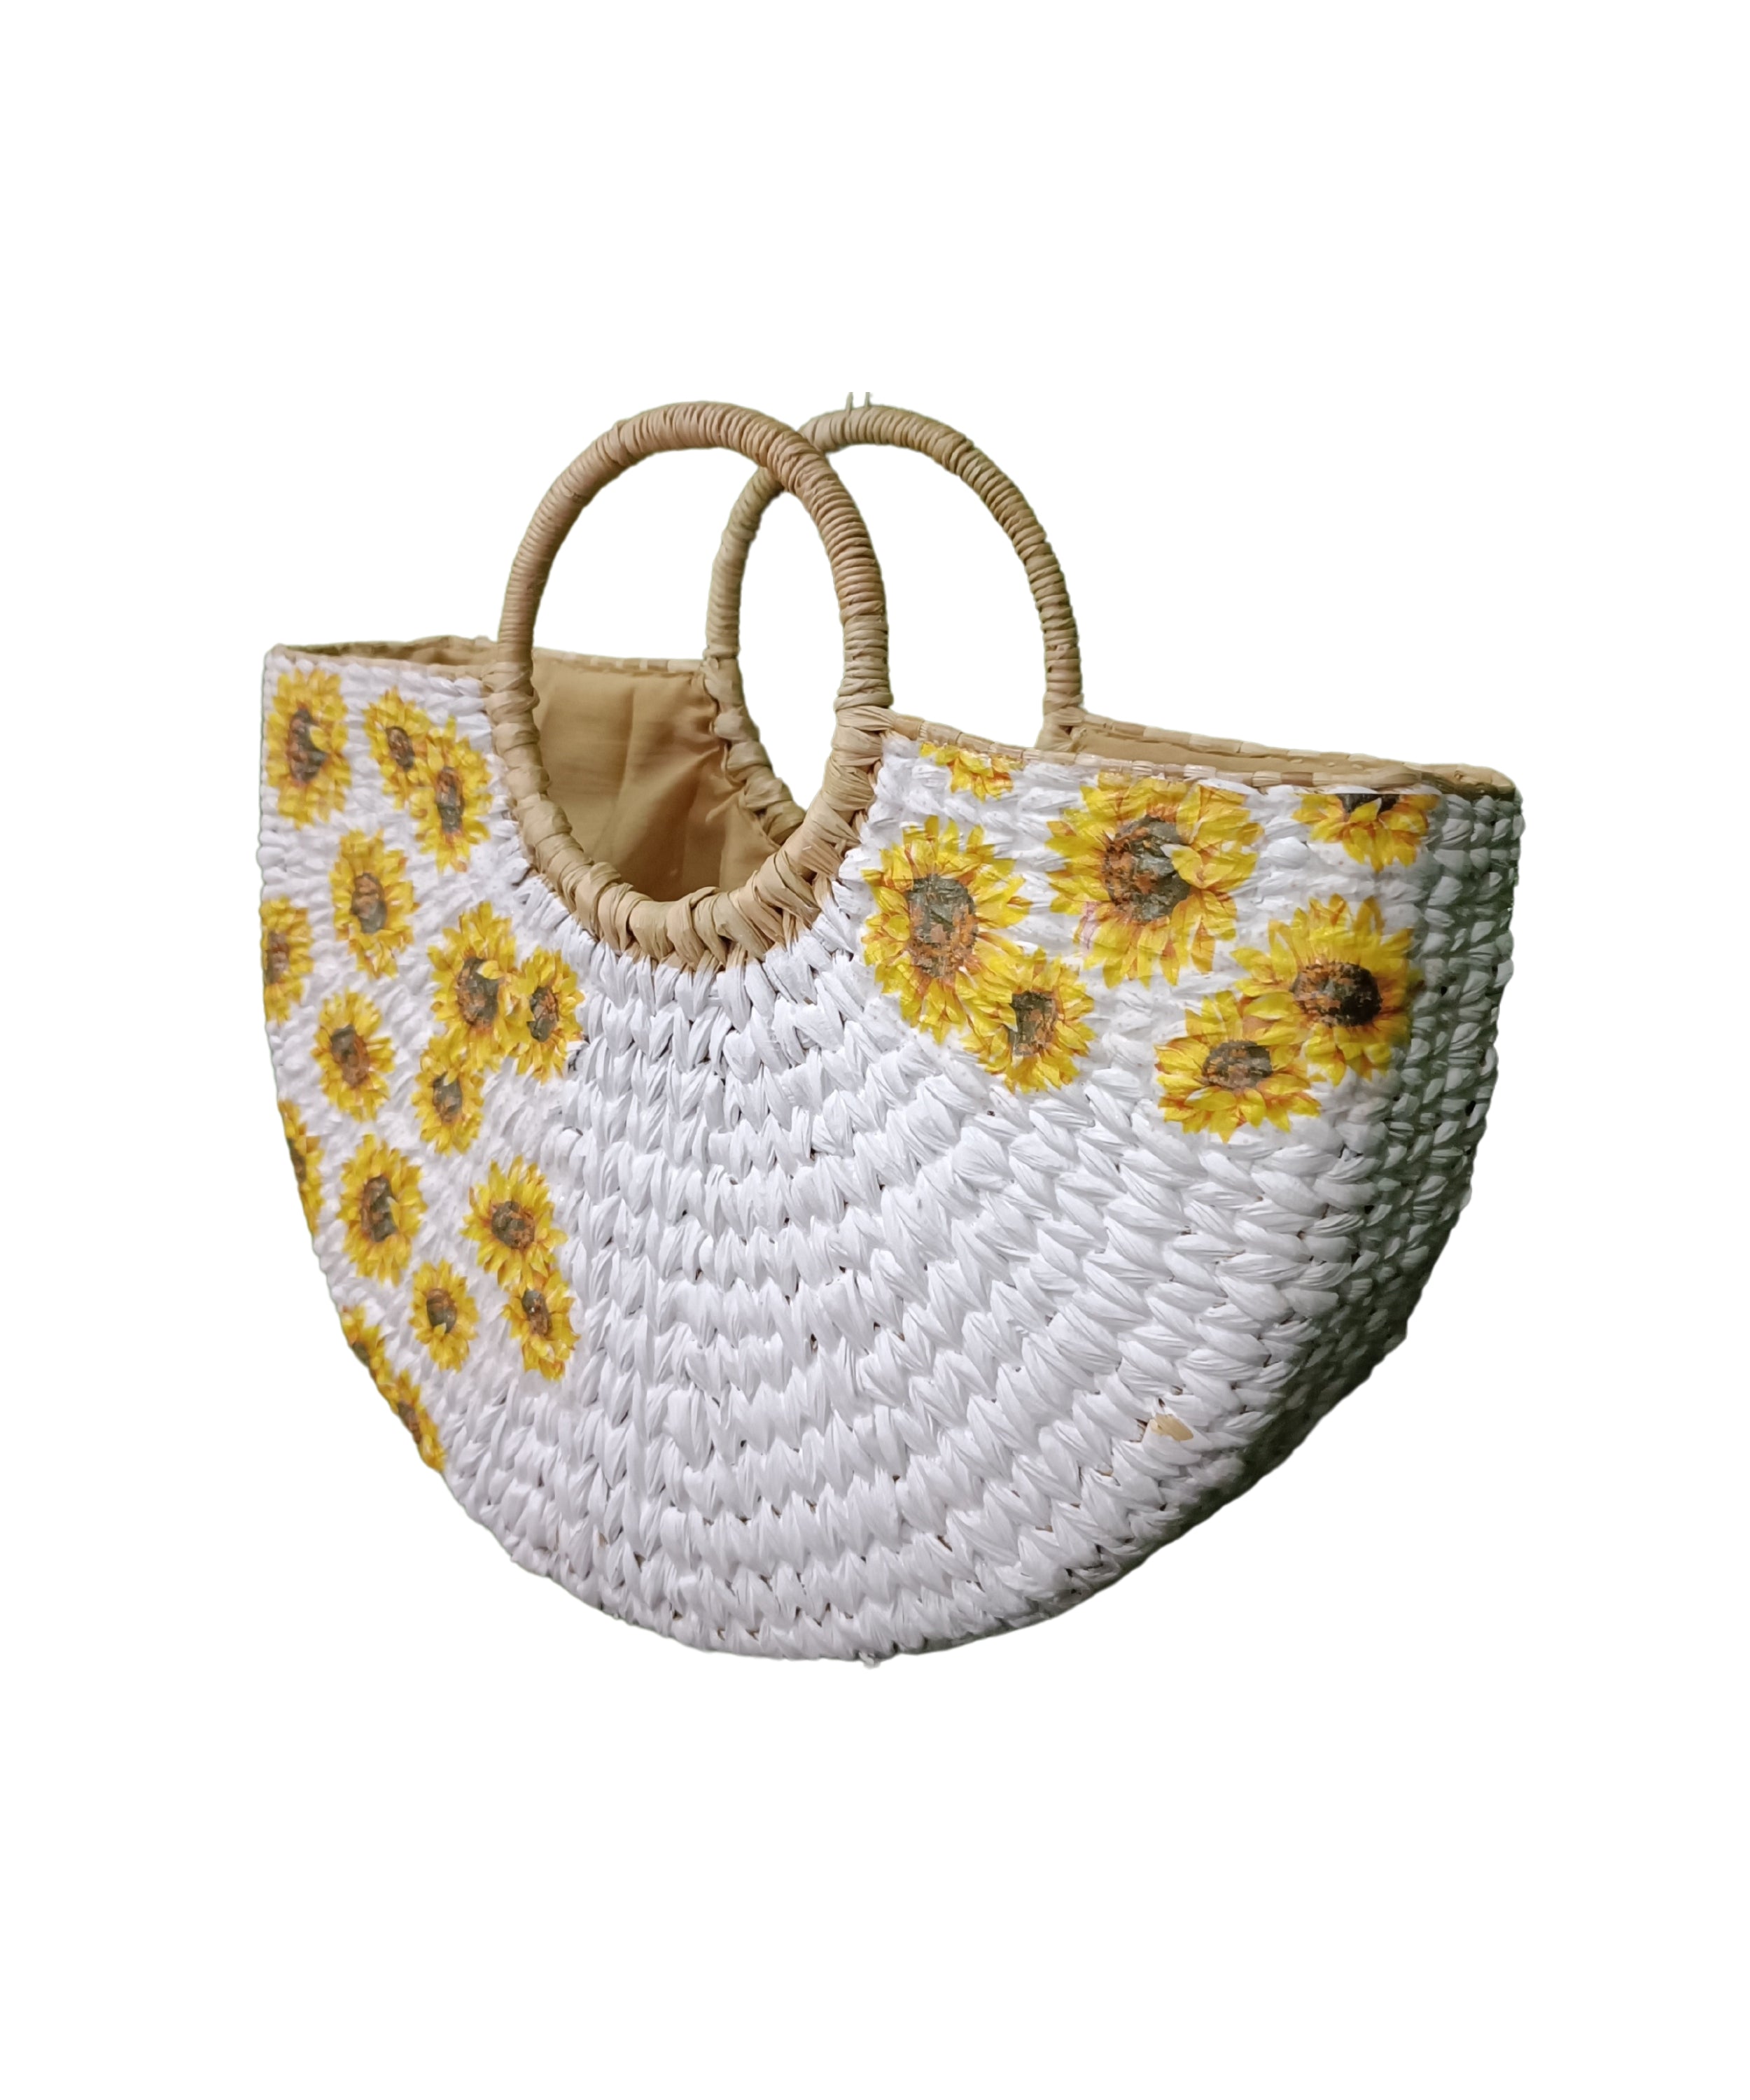 Sia Woven Bag | Kauna Grass Bag (Natural) - Online at Best Price in  Singapore only on ElectronicsCrazy.sg